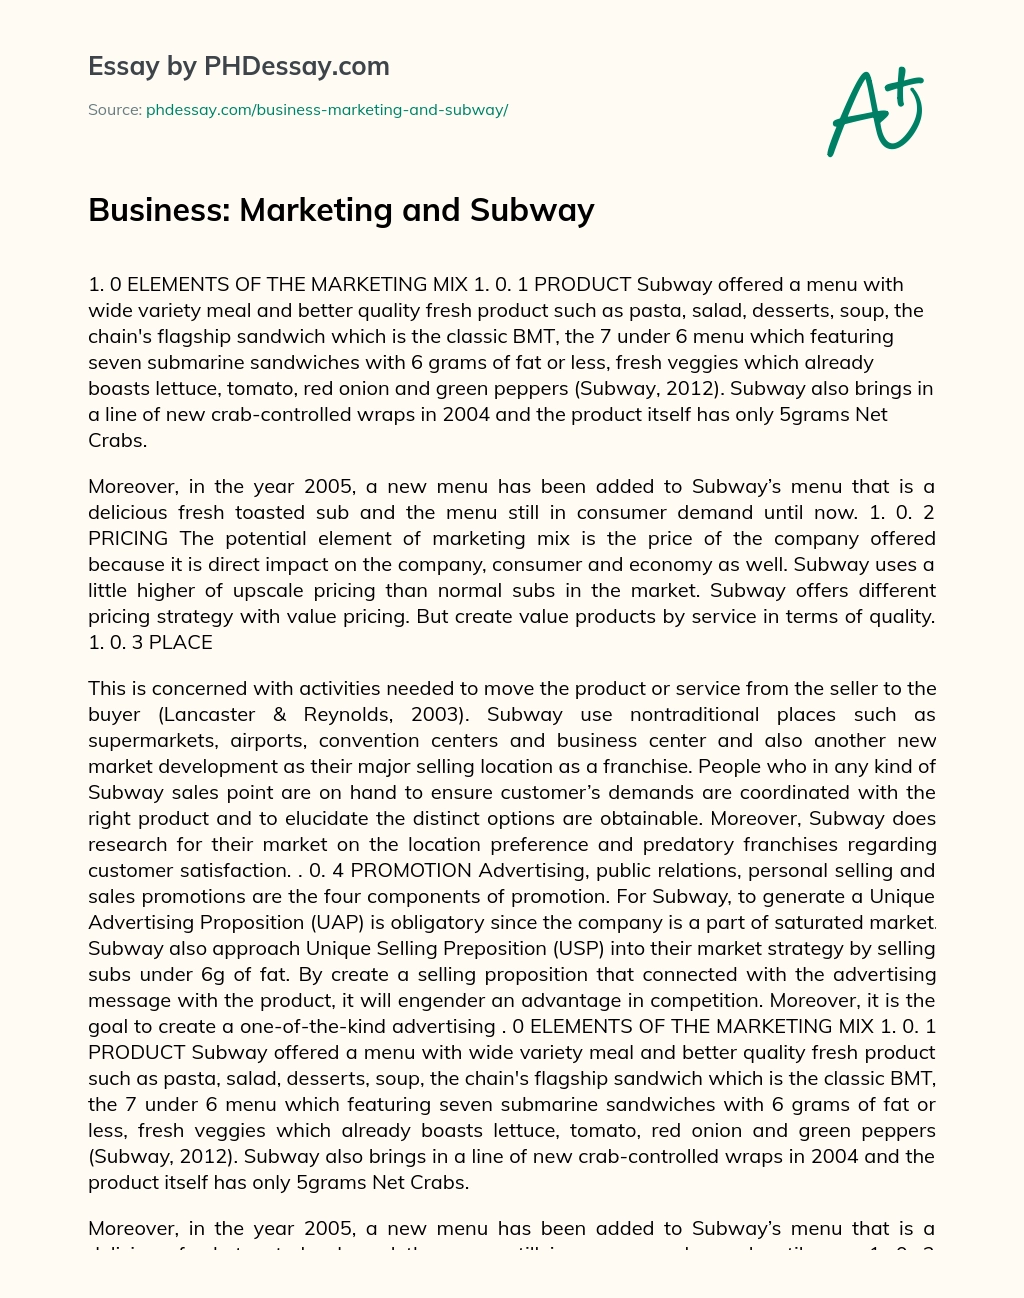 Business: Marketing and Subway essay